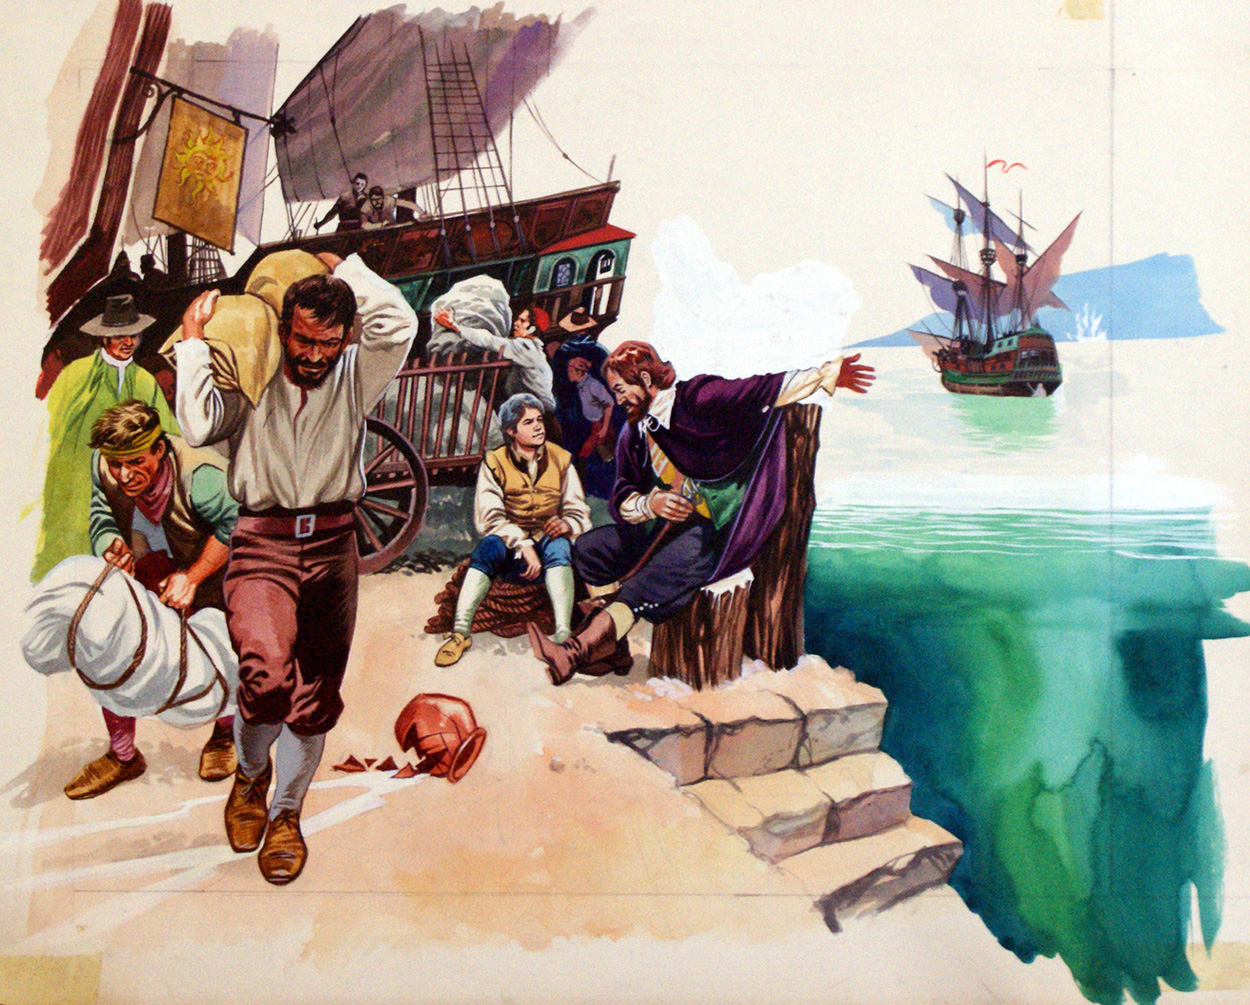 The Pirate Base (Original) art by Peter Jackson at The Illustration Art Gallery